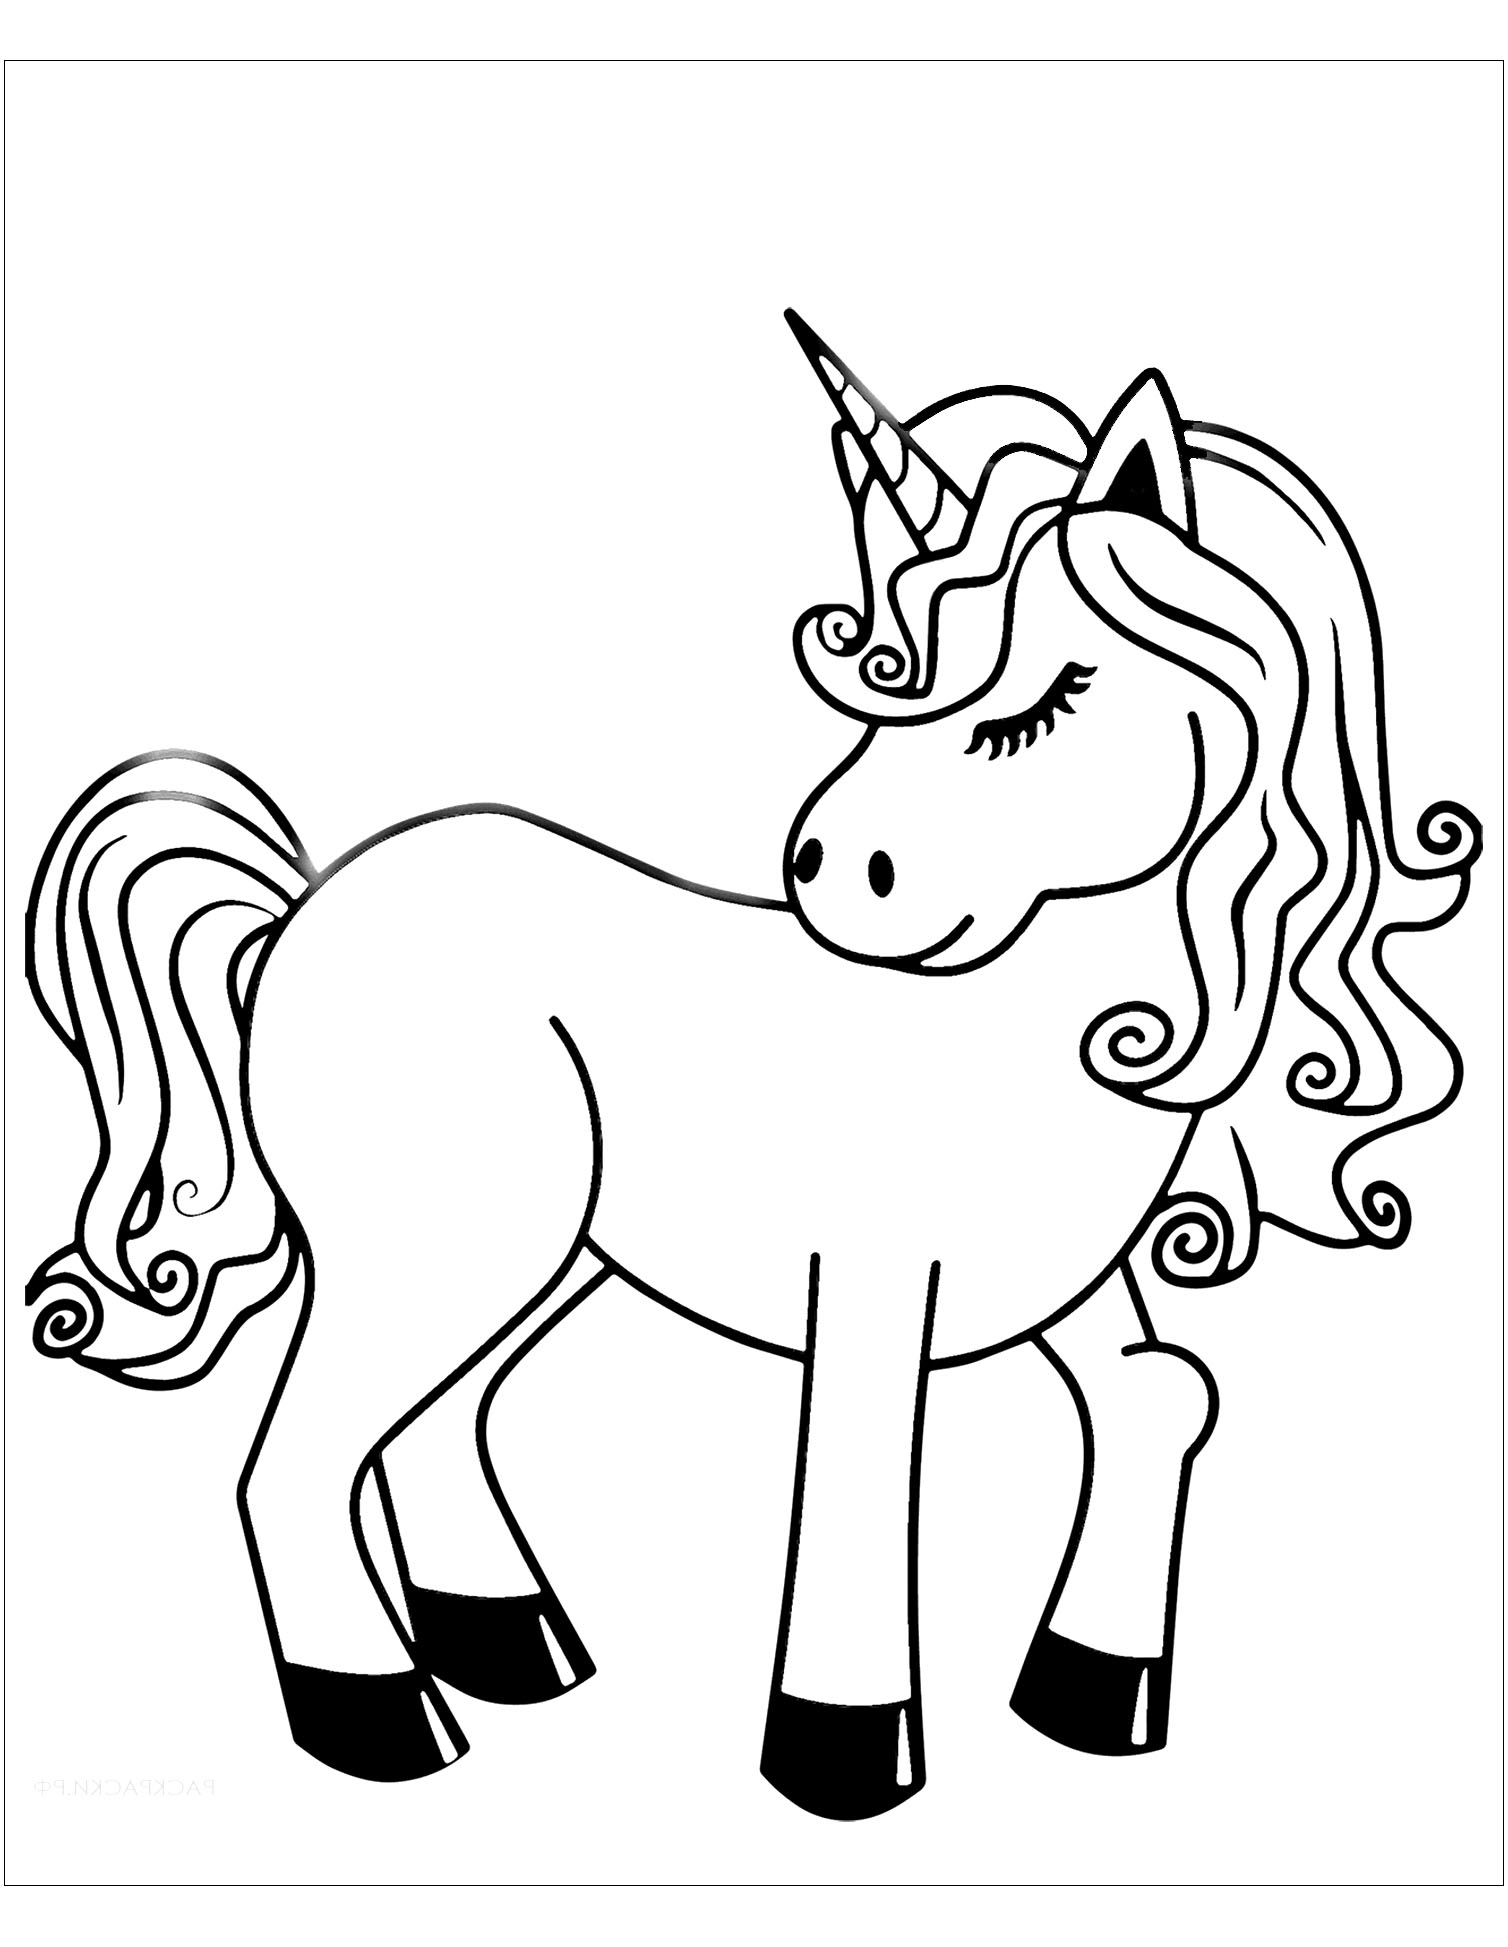 Download Unicorns To Print For Free Unicorns Kids Coloring Pages